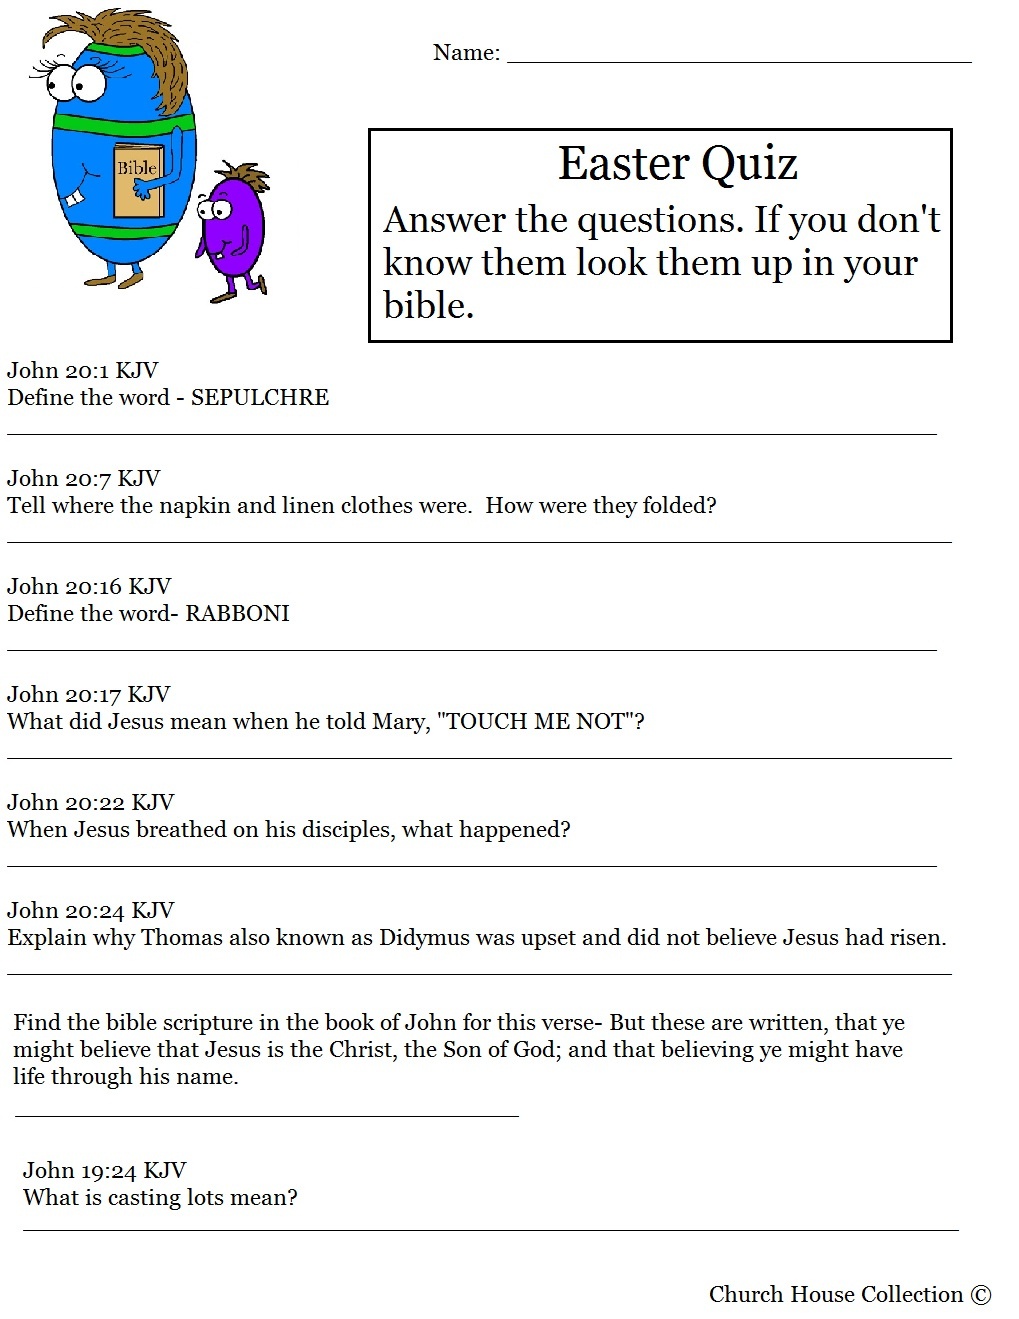 Hard Easter Quiz On Resurrection Of Jesus - Free Printable Bible Trivia For Adults